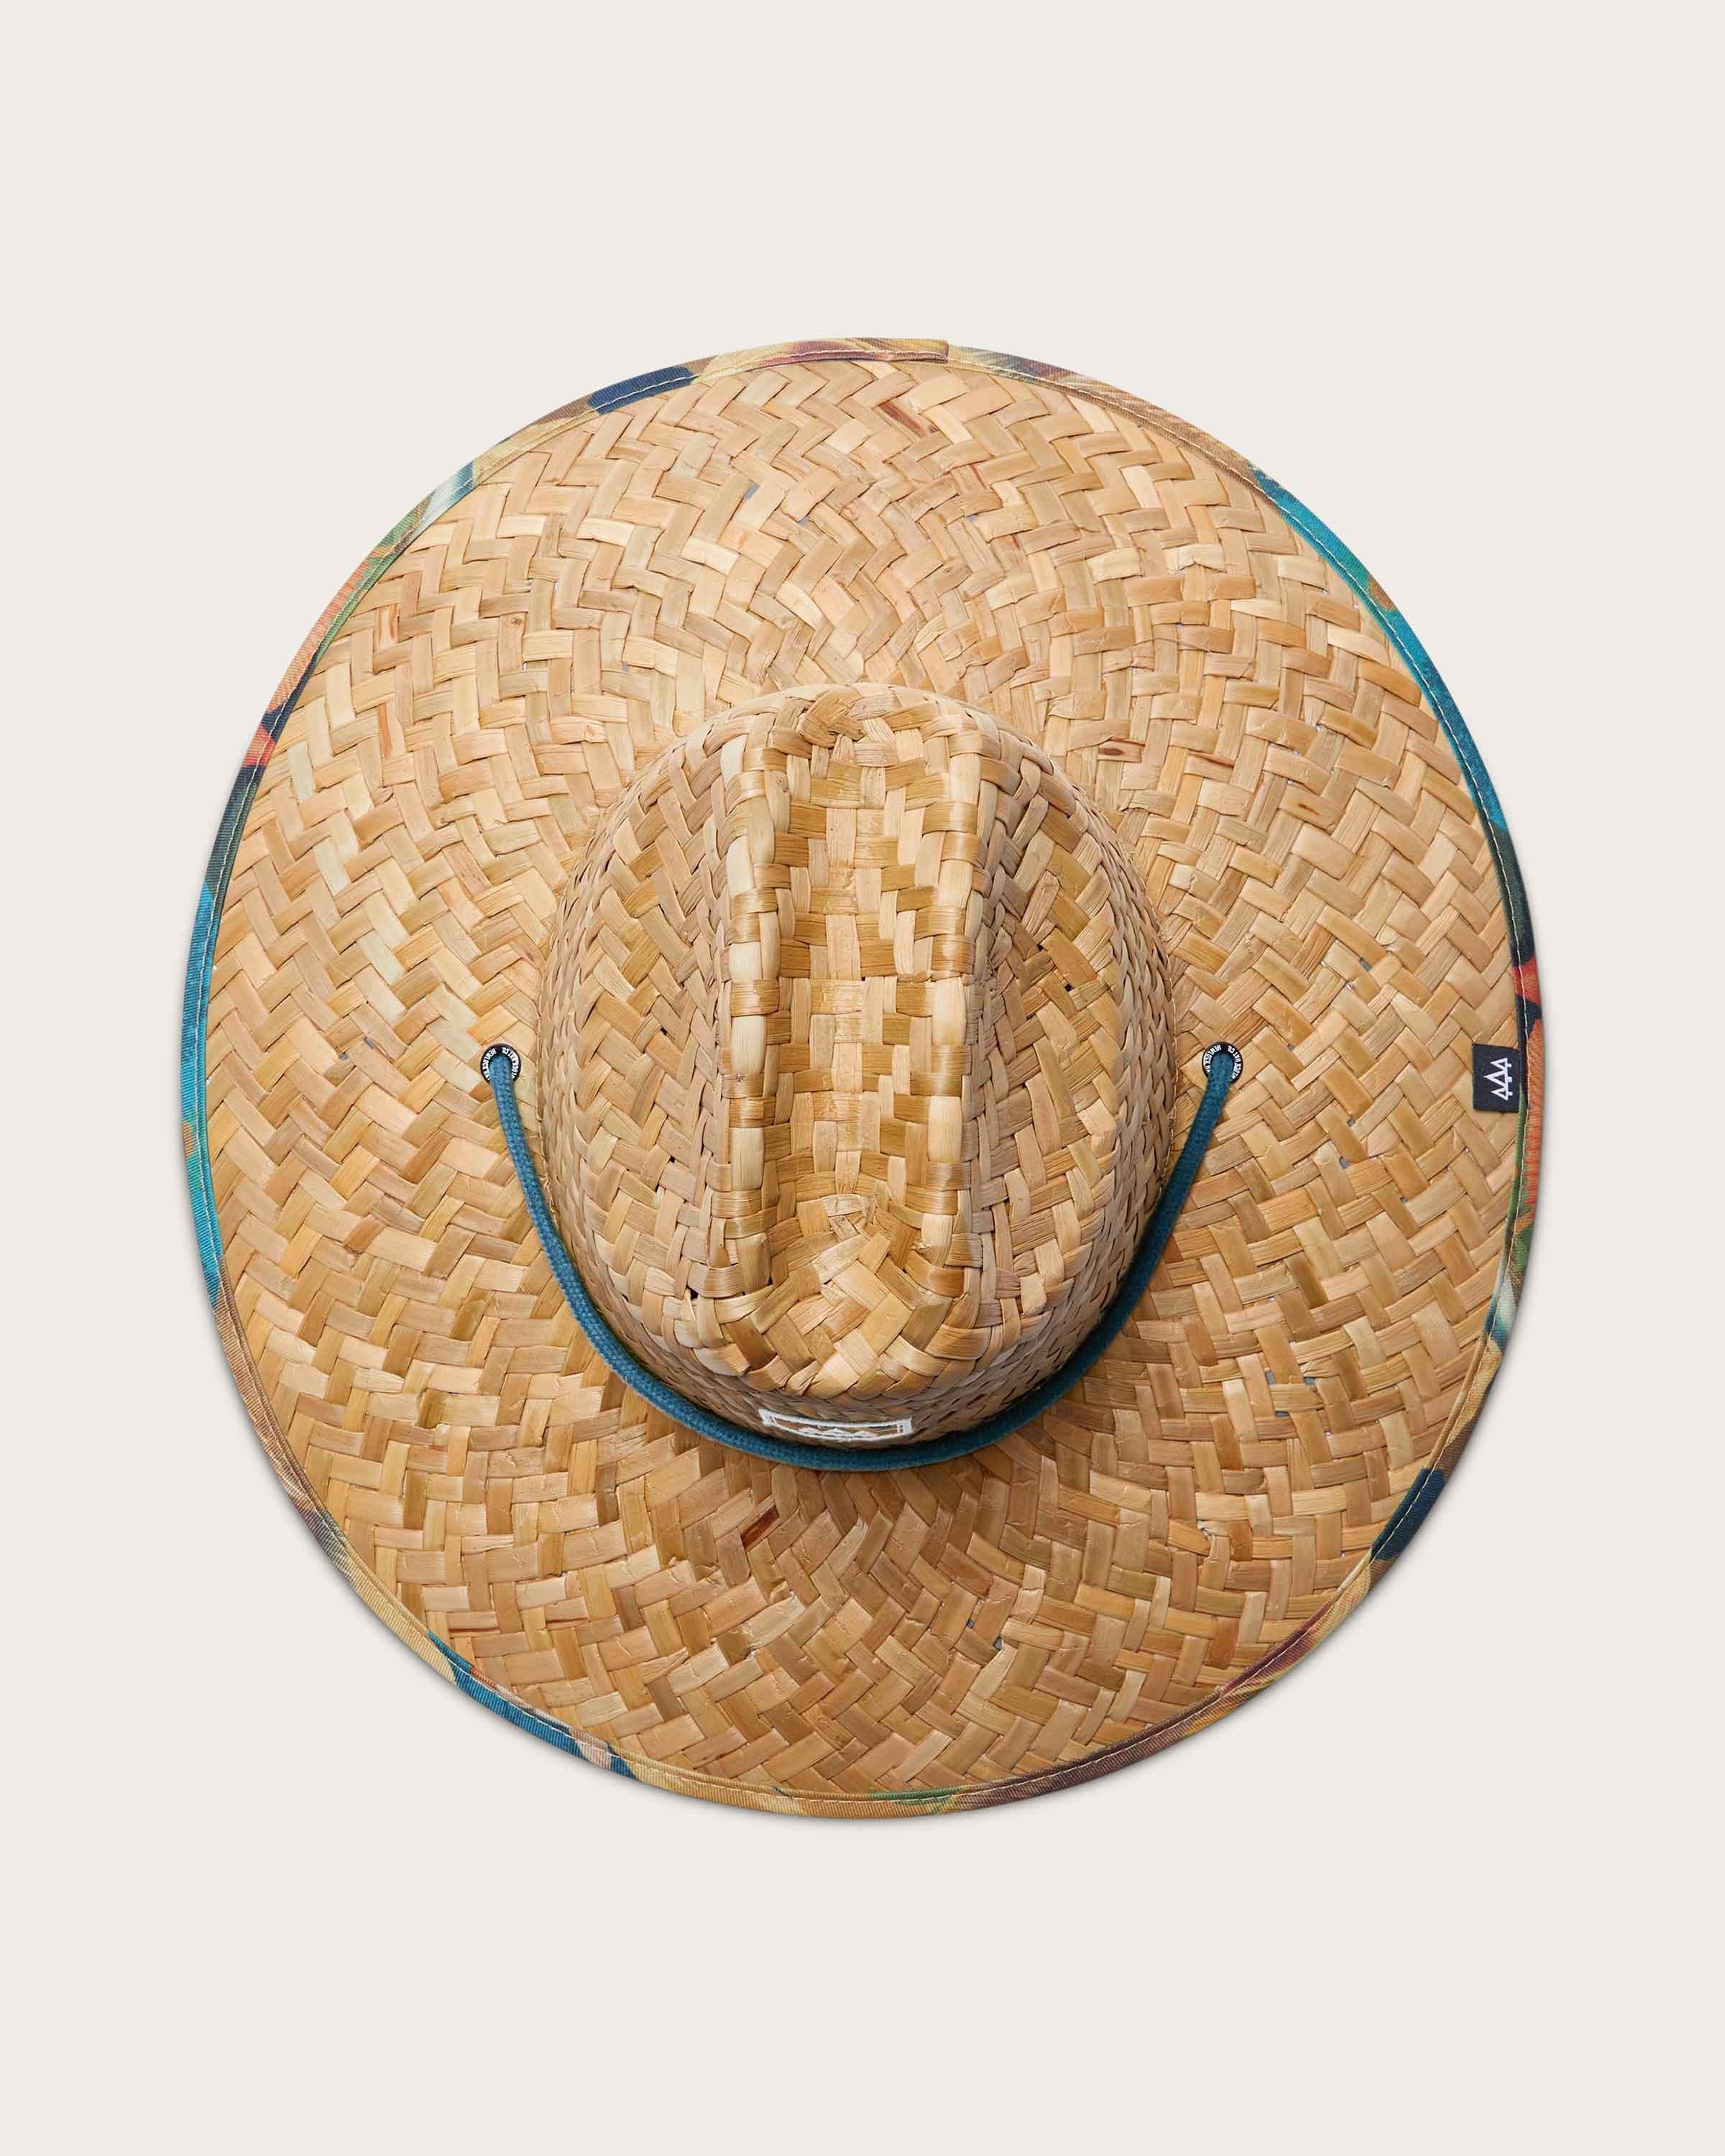 Mariner - undefined - Hemlock Hat Co. Lifeguards - Adults